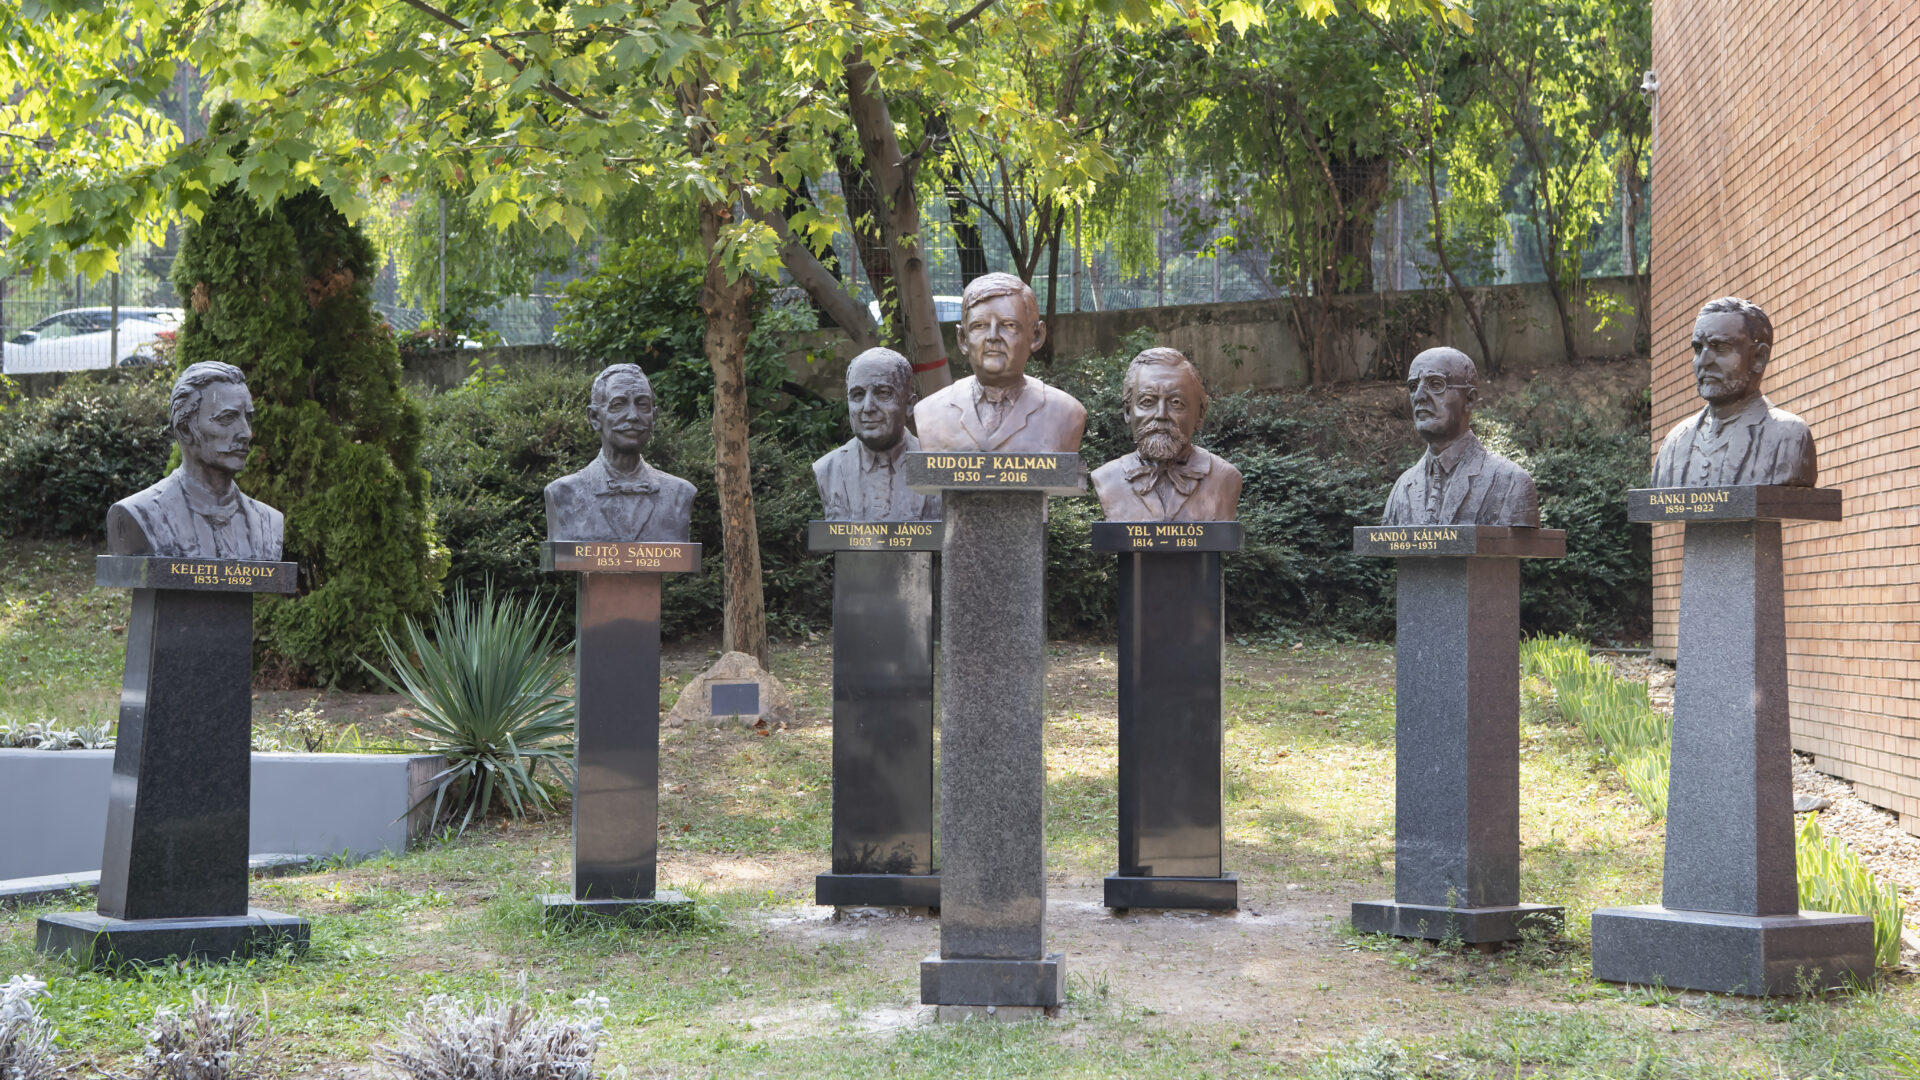 The statues of the eponymous people